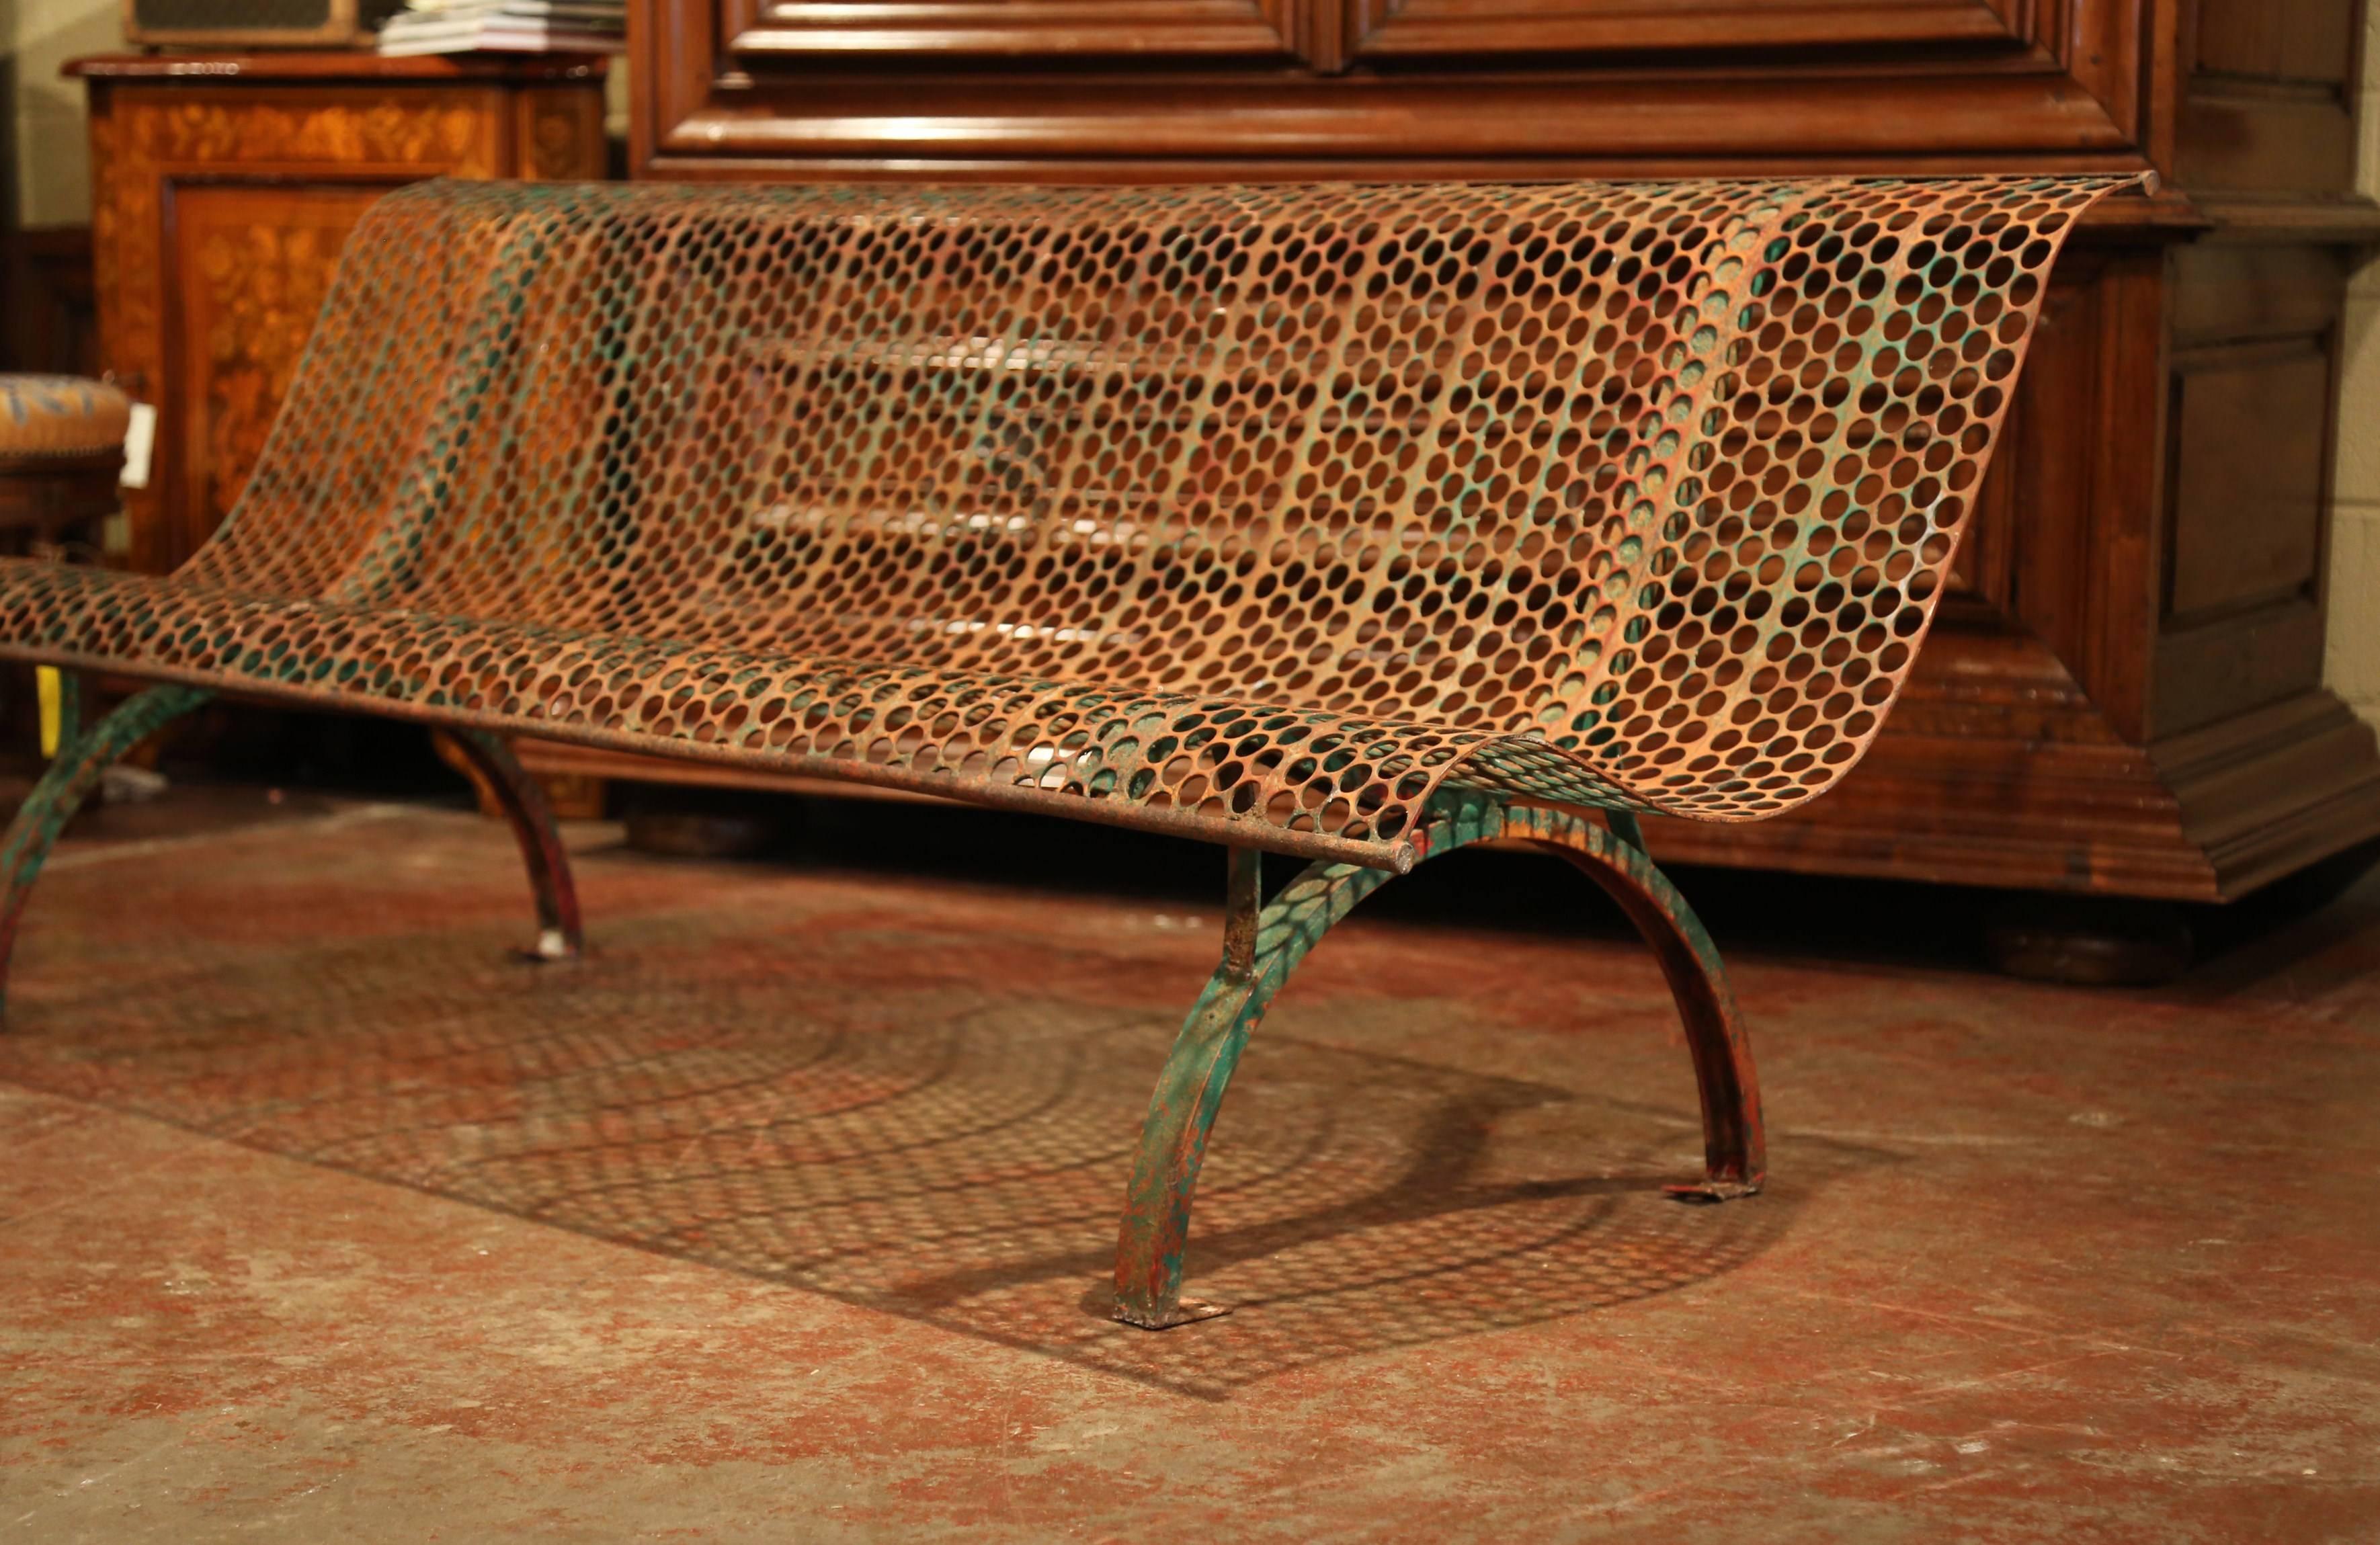 Patinated Early 20th Century French Iron Garden Bench with Curved Back and Seat